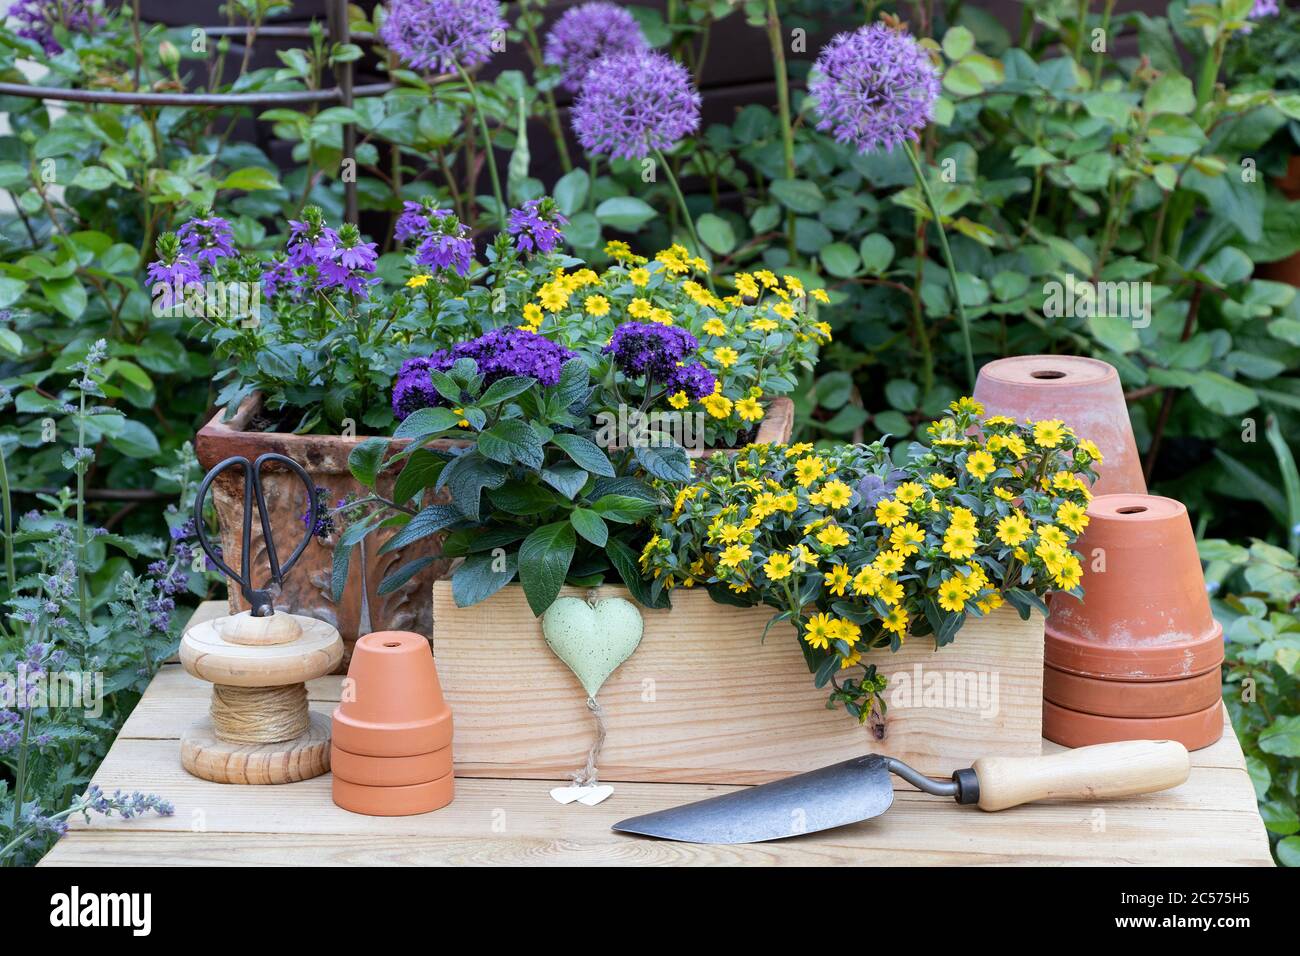 rustic garden decoration with summer flowers in purple and yellow and terracotta pots Stock Photo